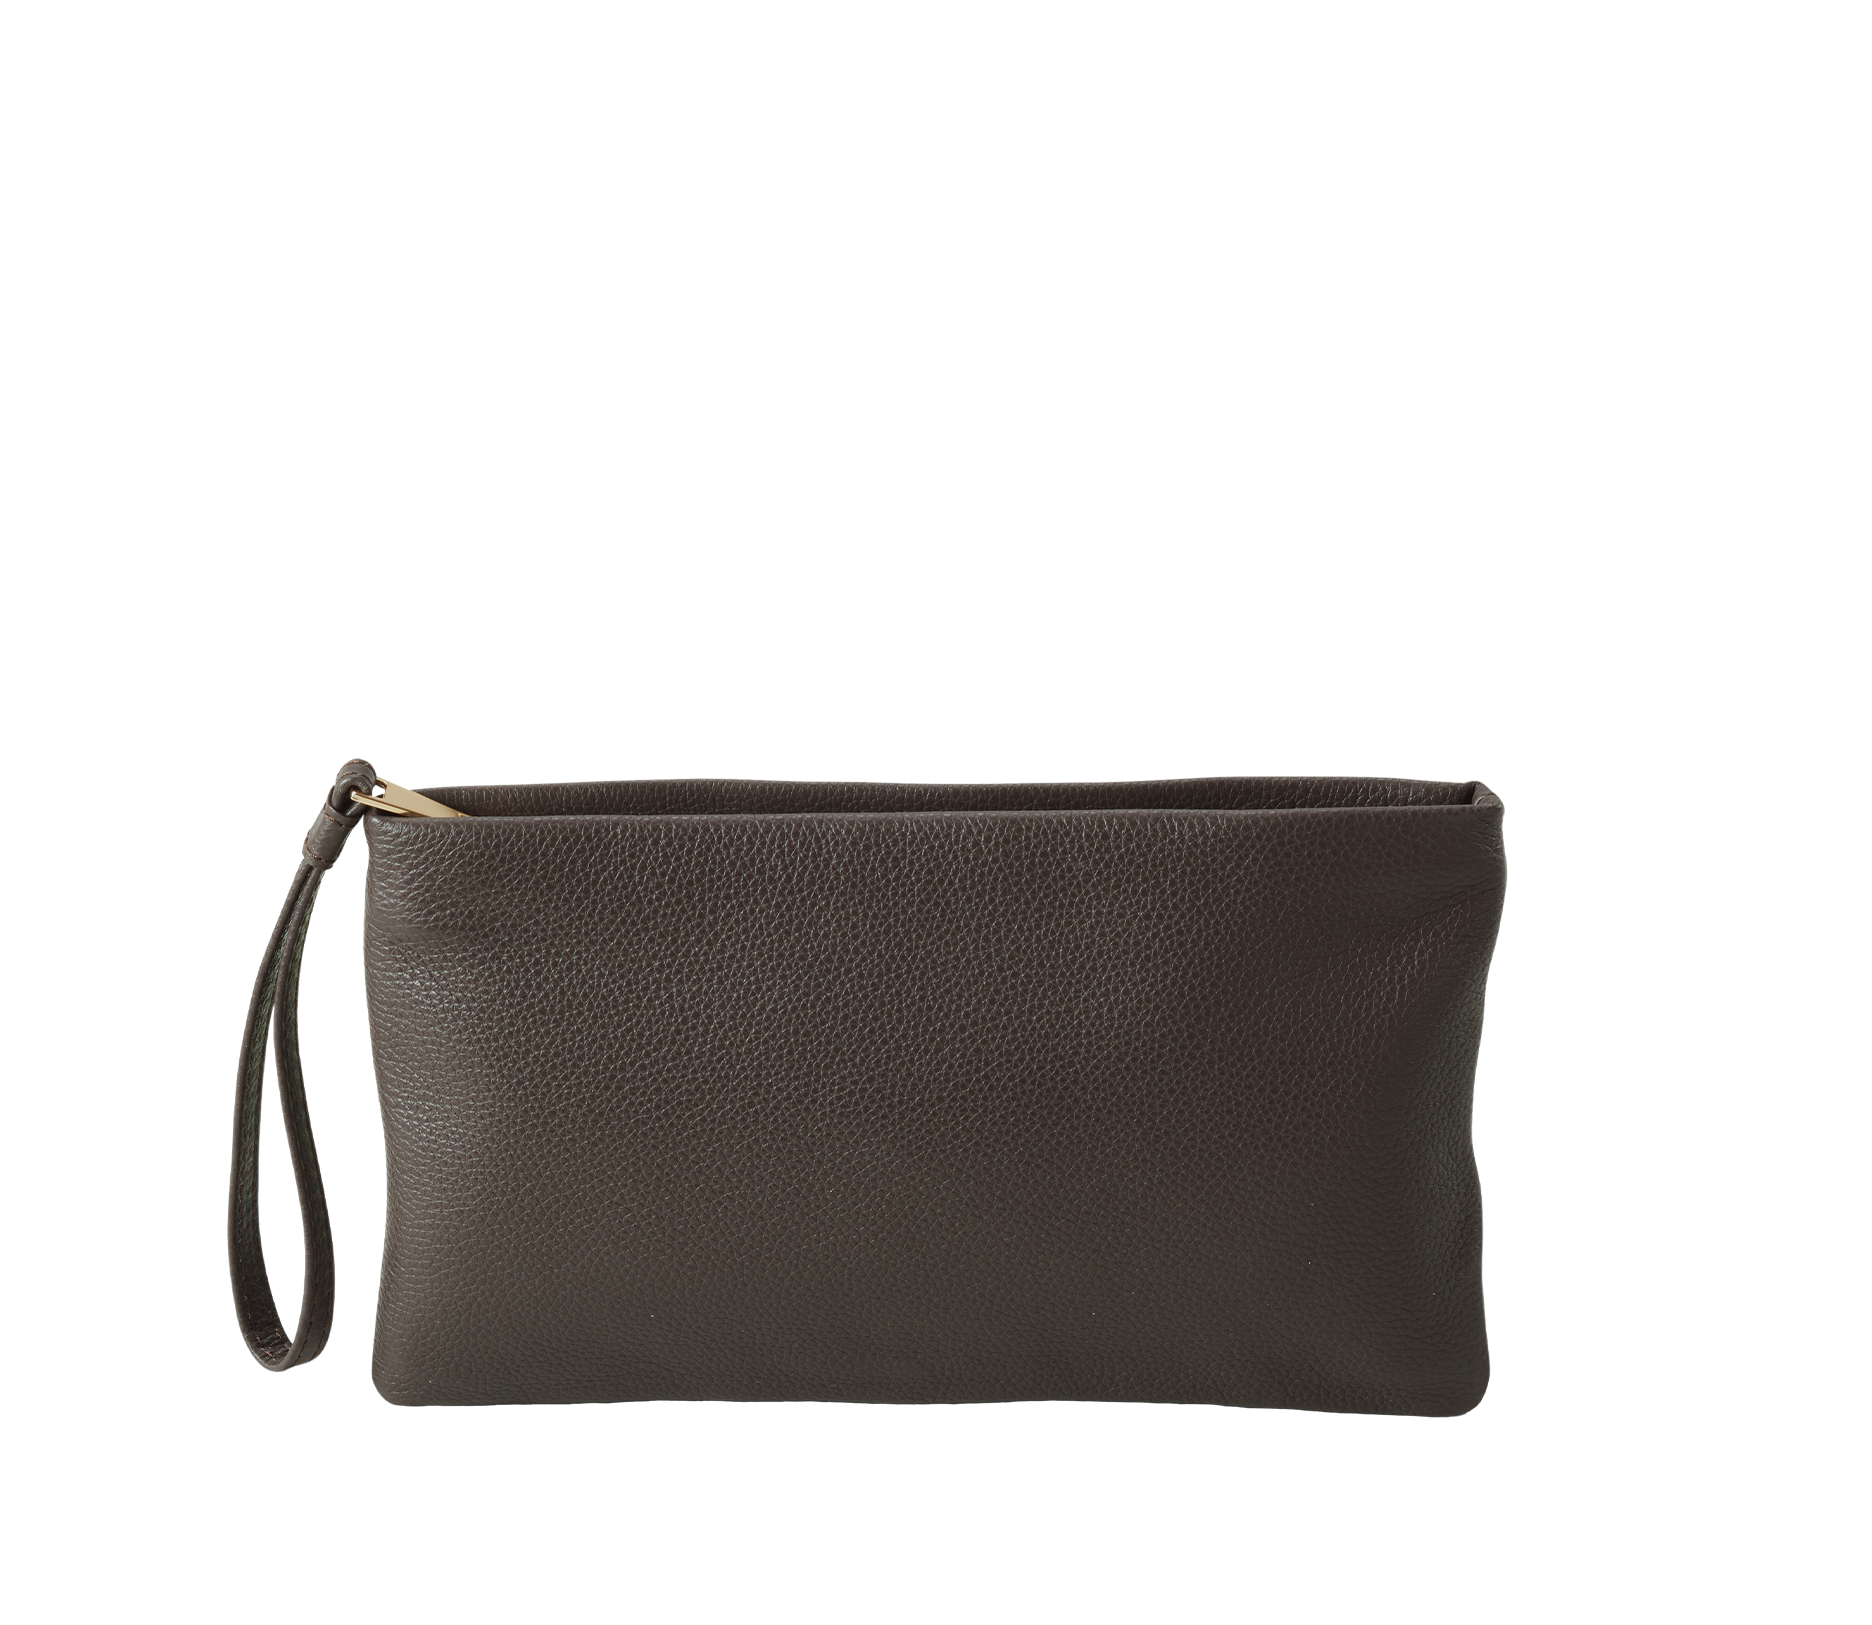 Alexis Travel Clutch in Cocoa